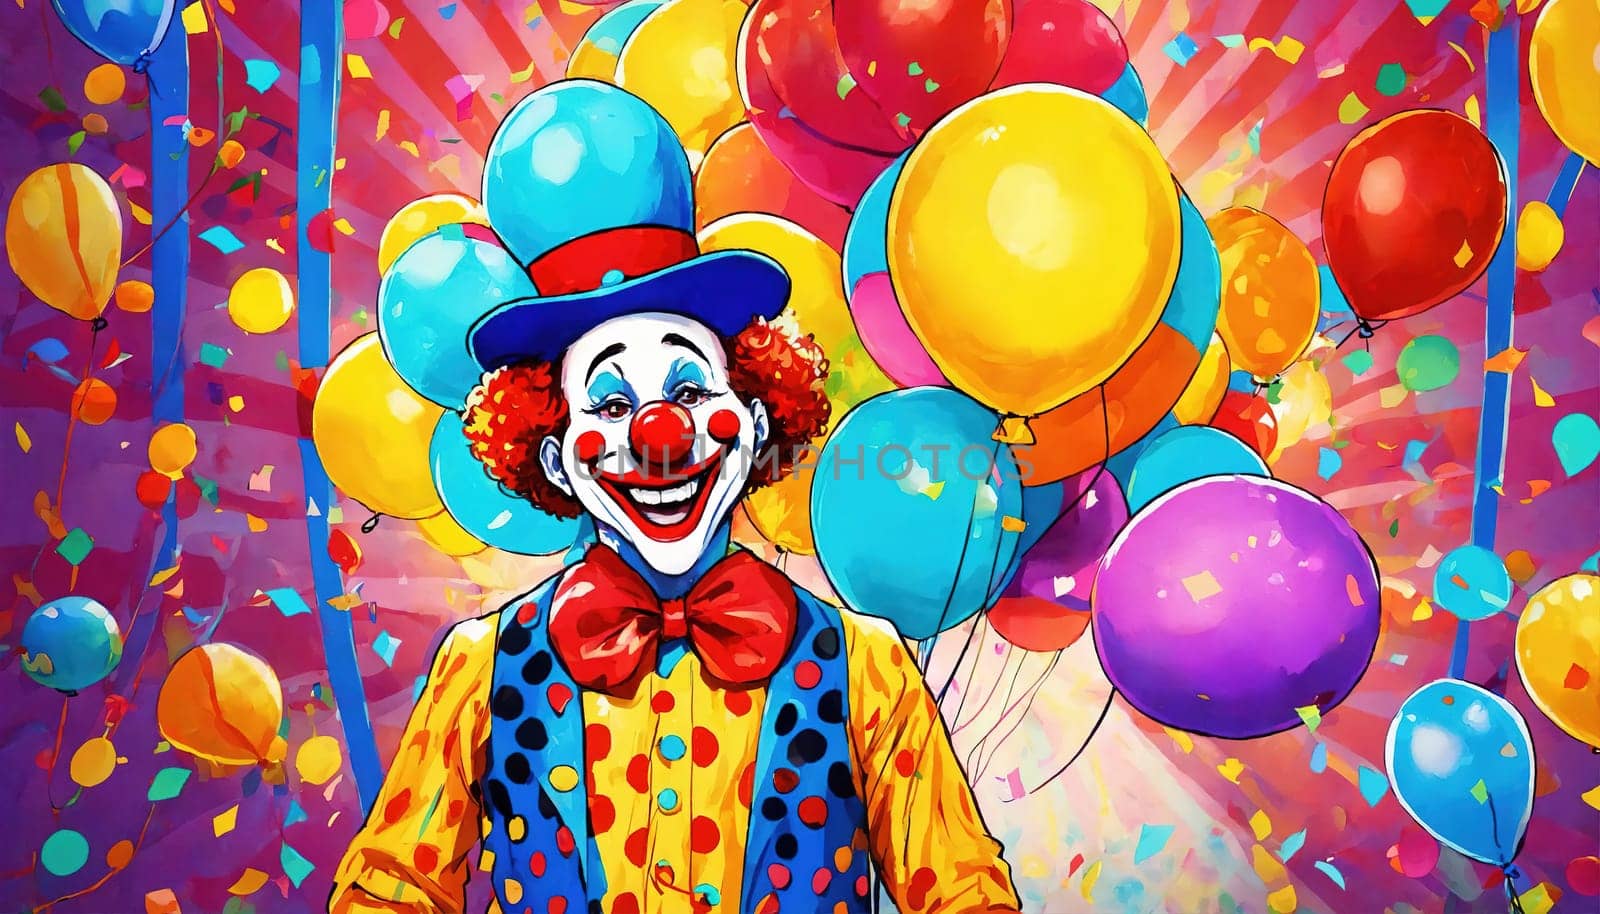 A cheerful and bright clown for a children's party. High quality illustration